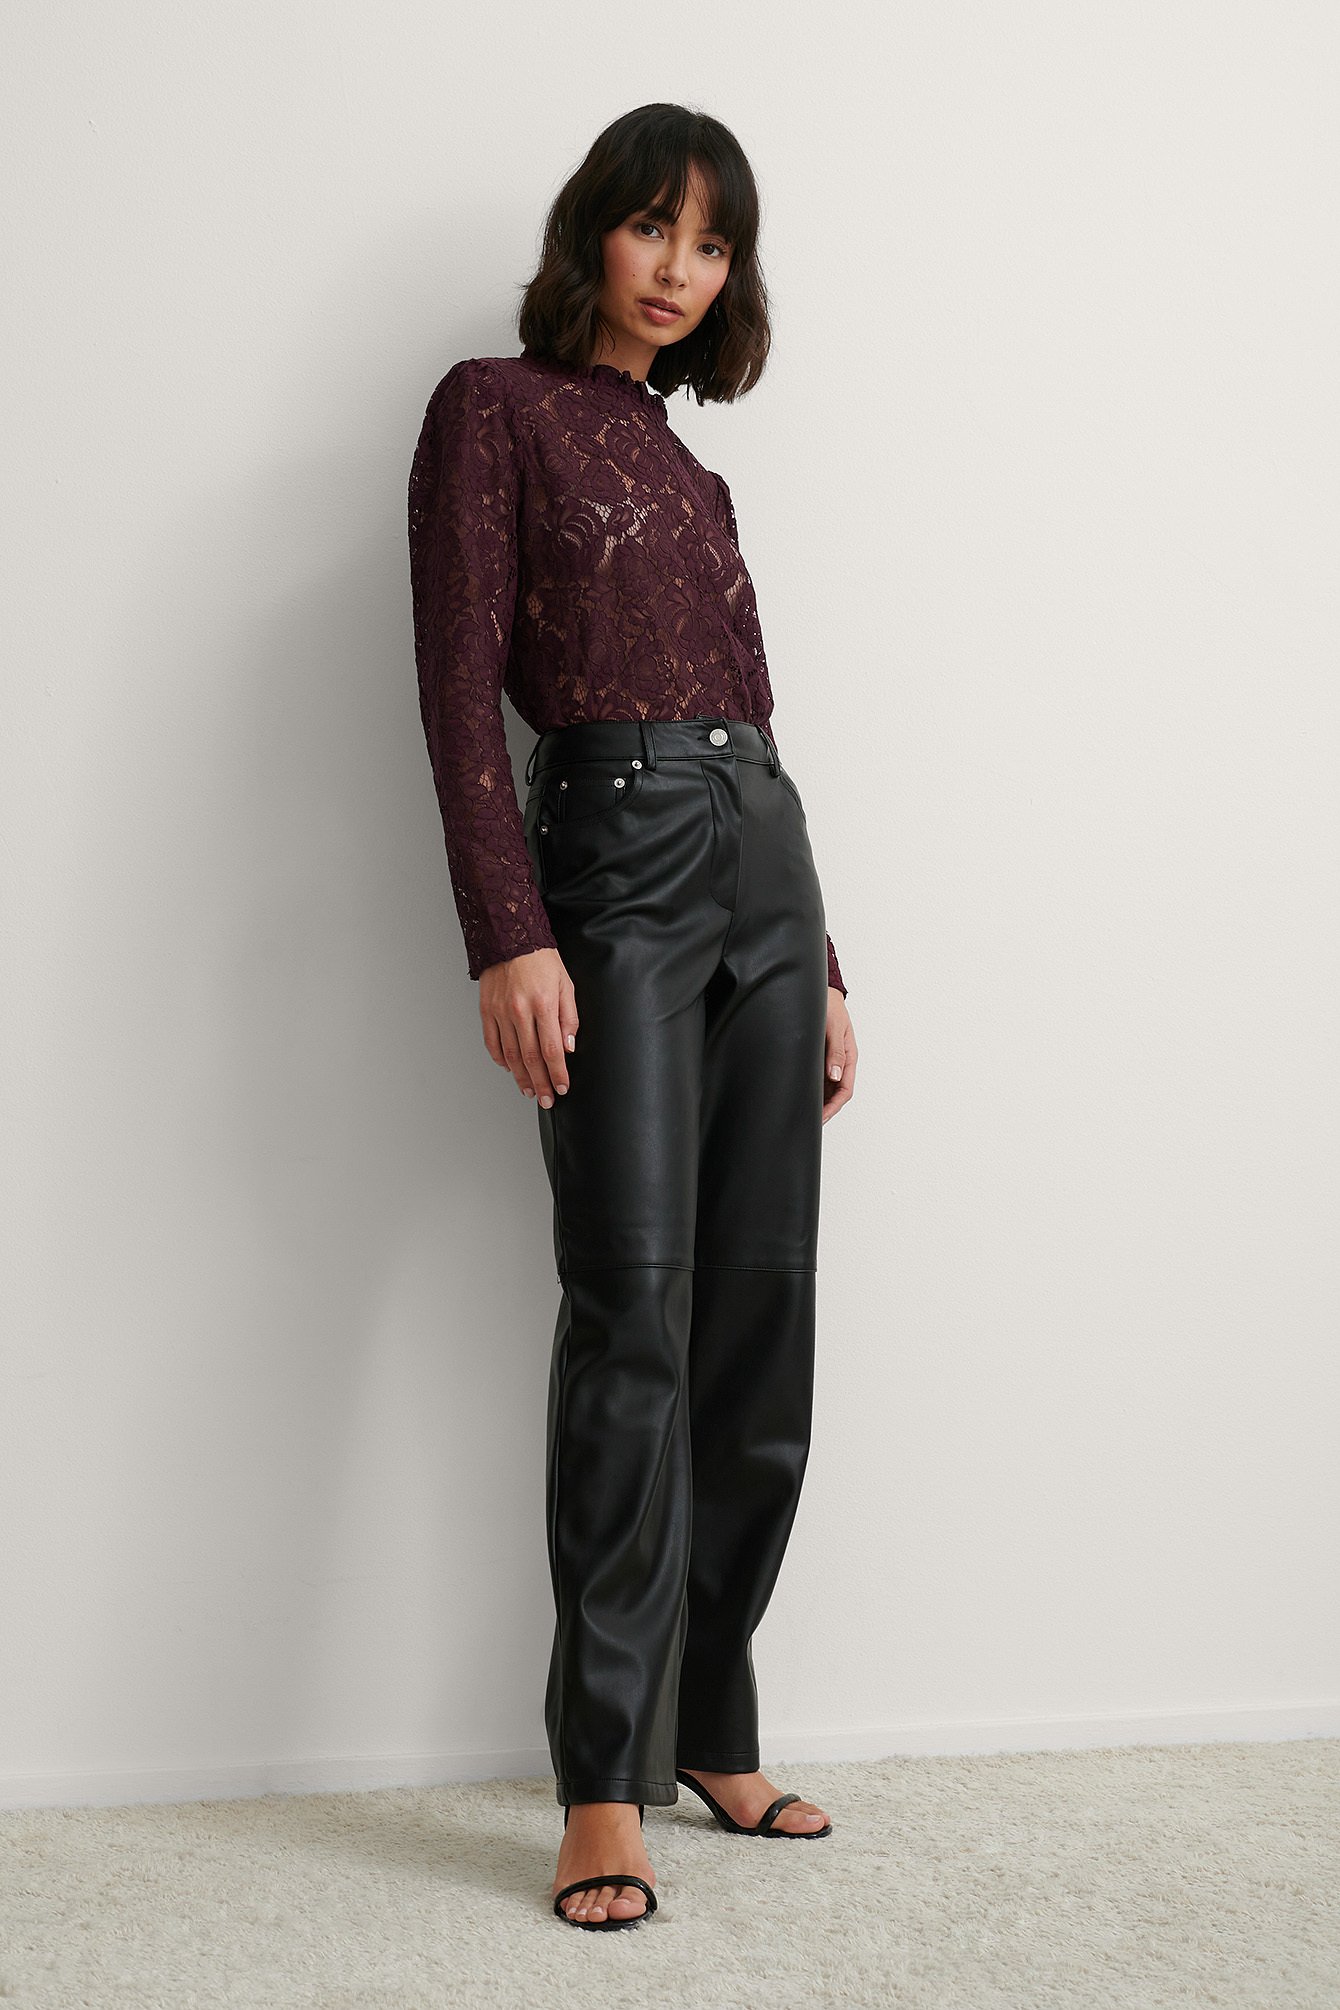 High Neck Frill Lace Blouse Outfit.